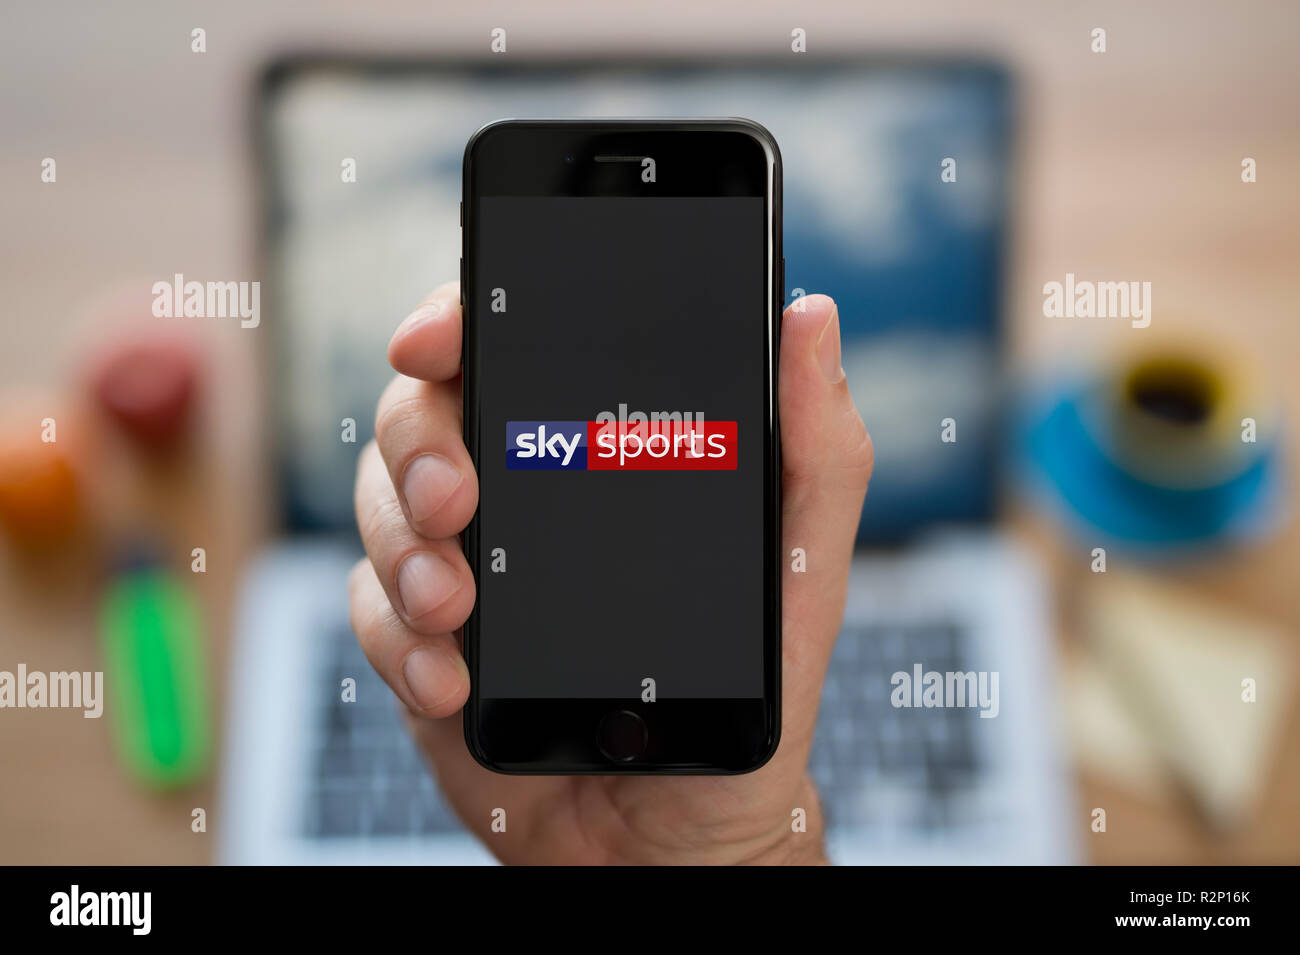 A man looks at his iPhone which displays the Sky Sports logo, while sat at his computer desk (Editorial use only). Stock Photo